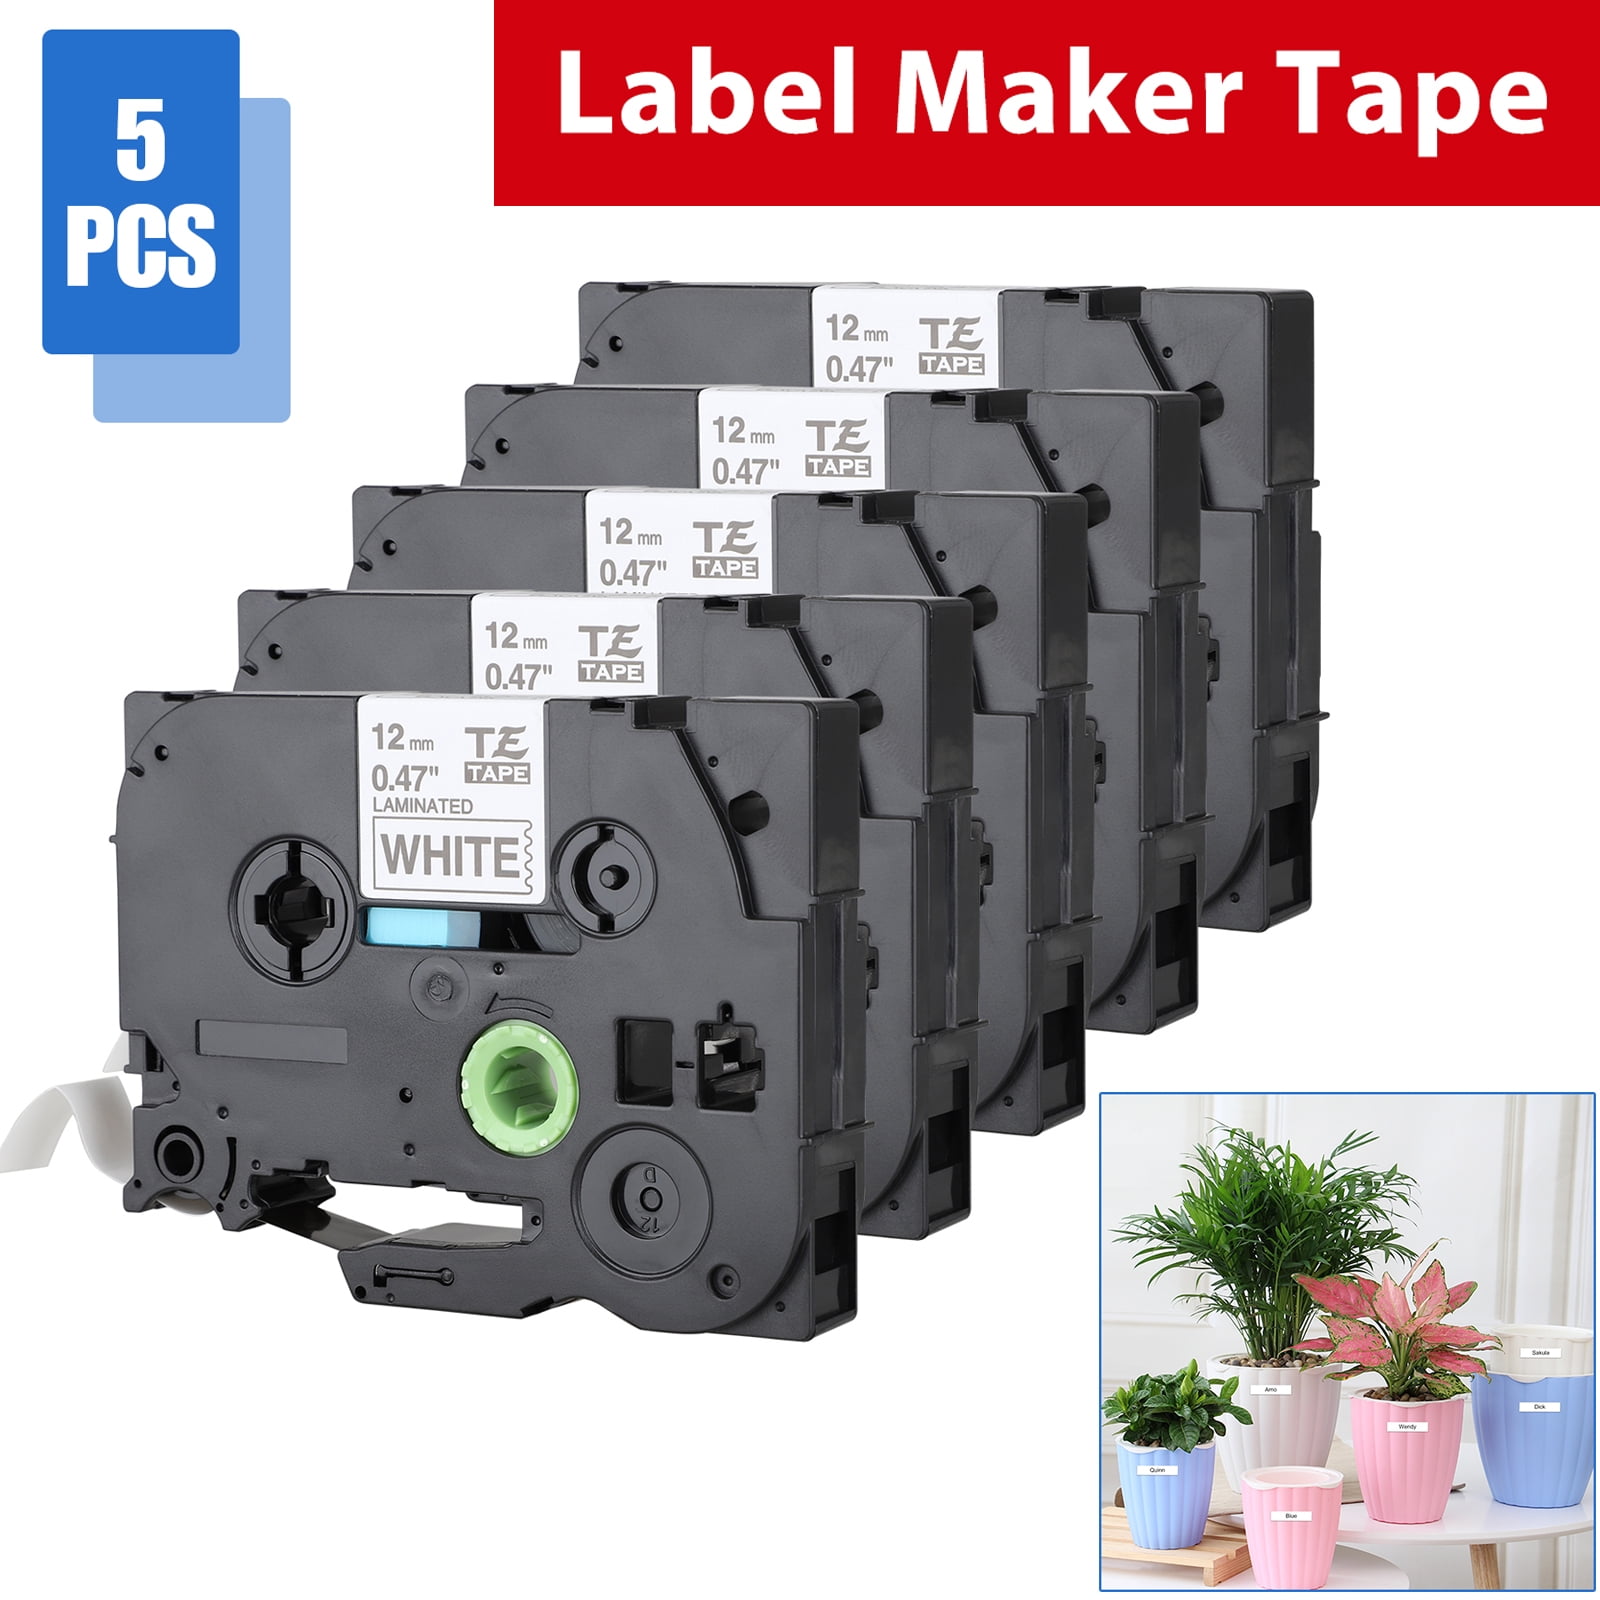 1/2 Inch 12mm Label Maker Tape 5-Pack Replace TZe Tape 12mm 0.47 Laminated White TZe-231 TZ-231 Label Tape Compatible with Bother Ptouch PTD210 PTH100 PTD400 PTD600 26.2 ft x 8m 